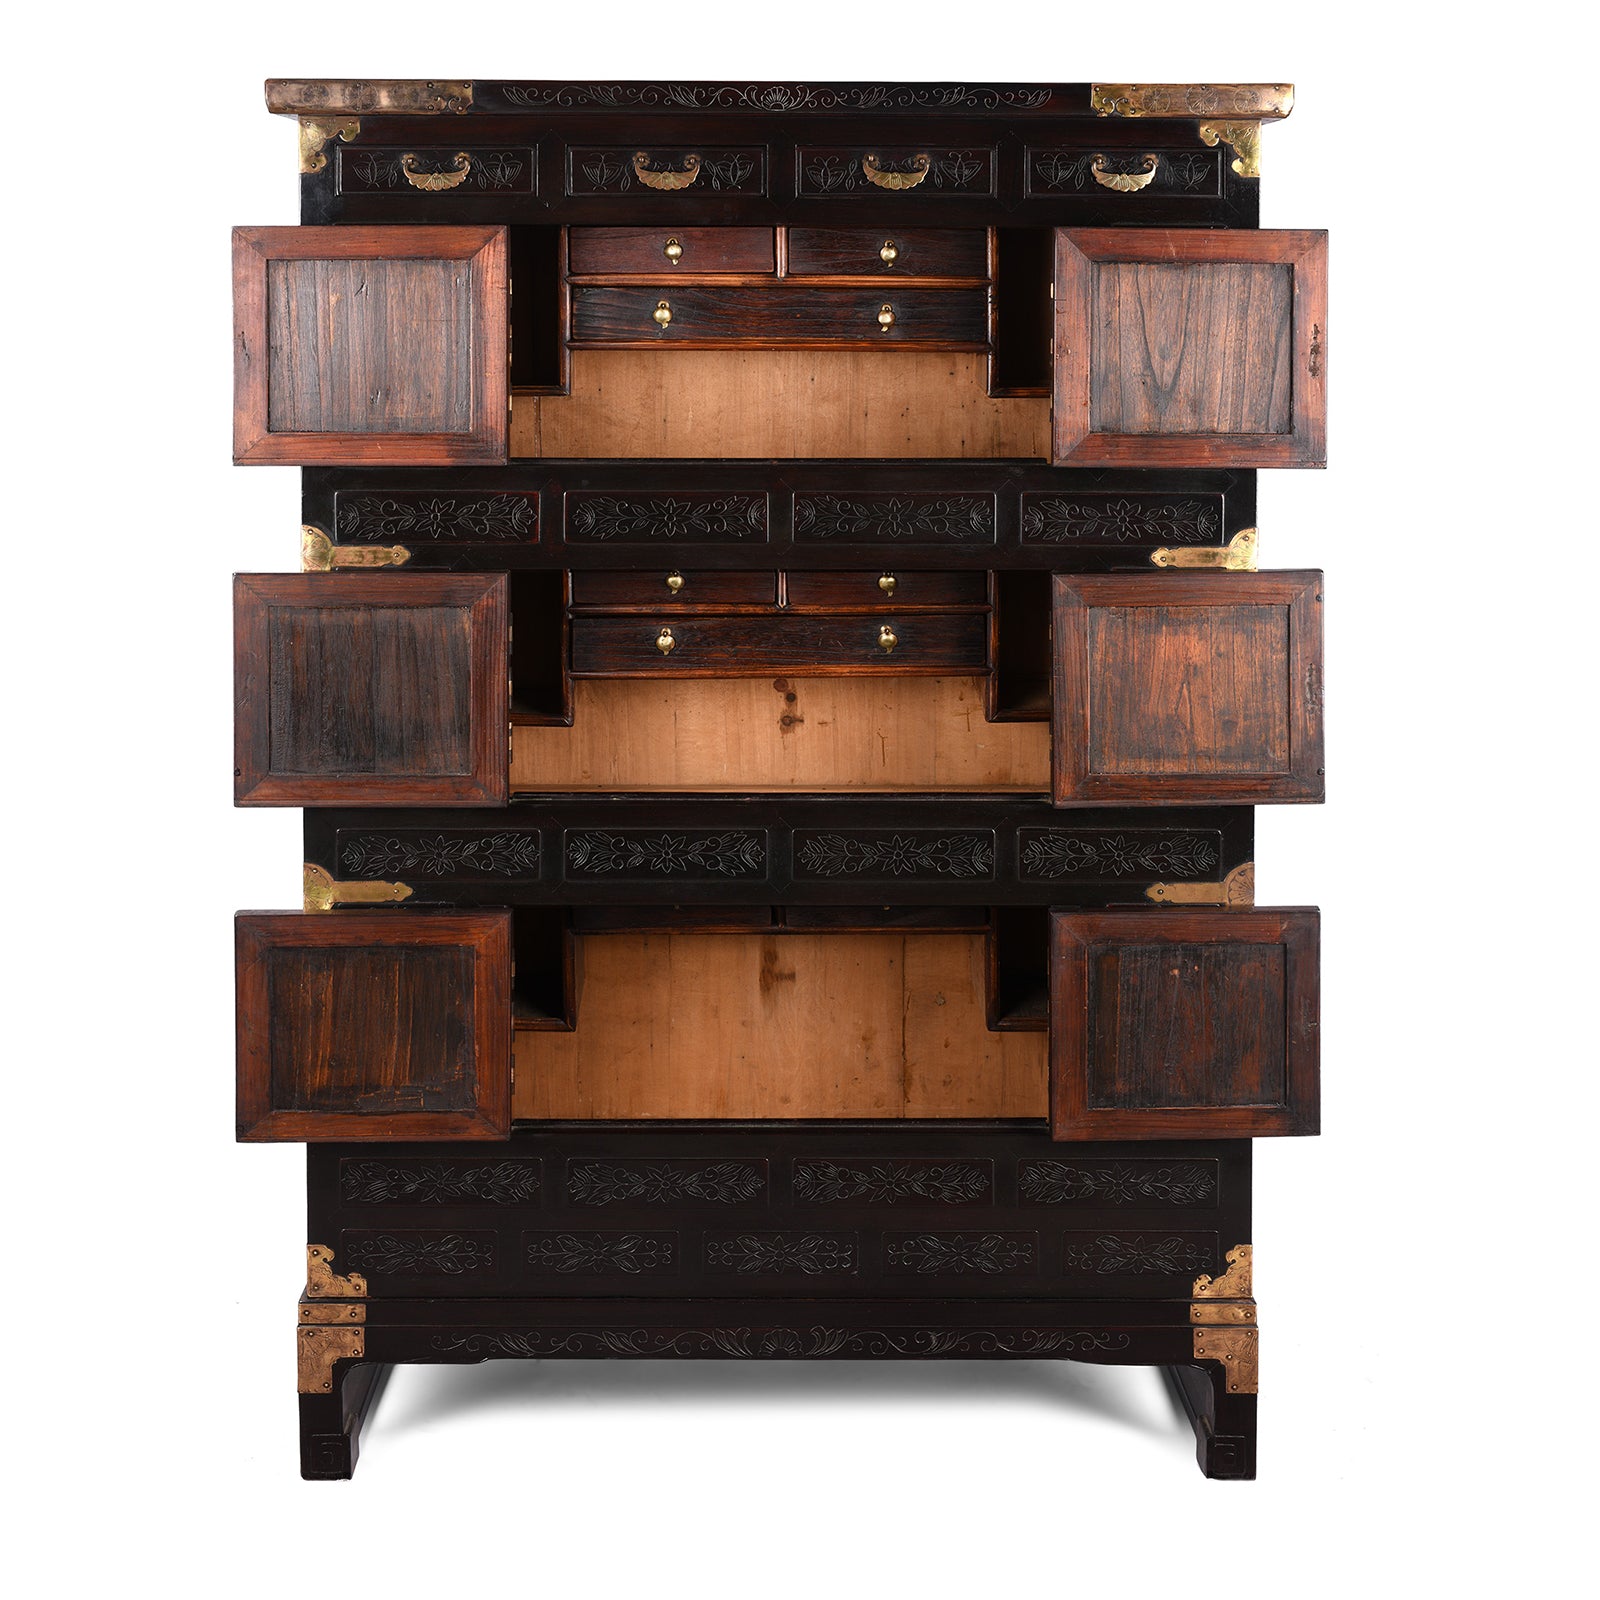 Korean Lacquer Samch'ung Jang Cabinet on Stand - Paulownia | Indigo Antques